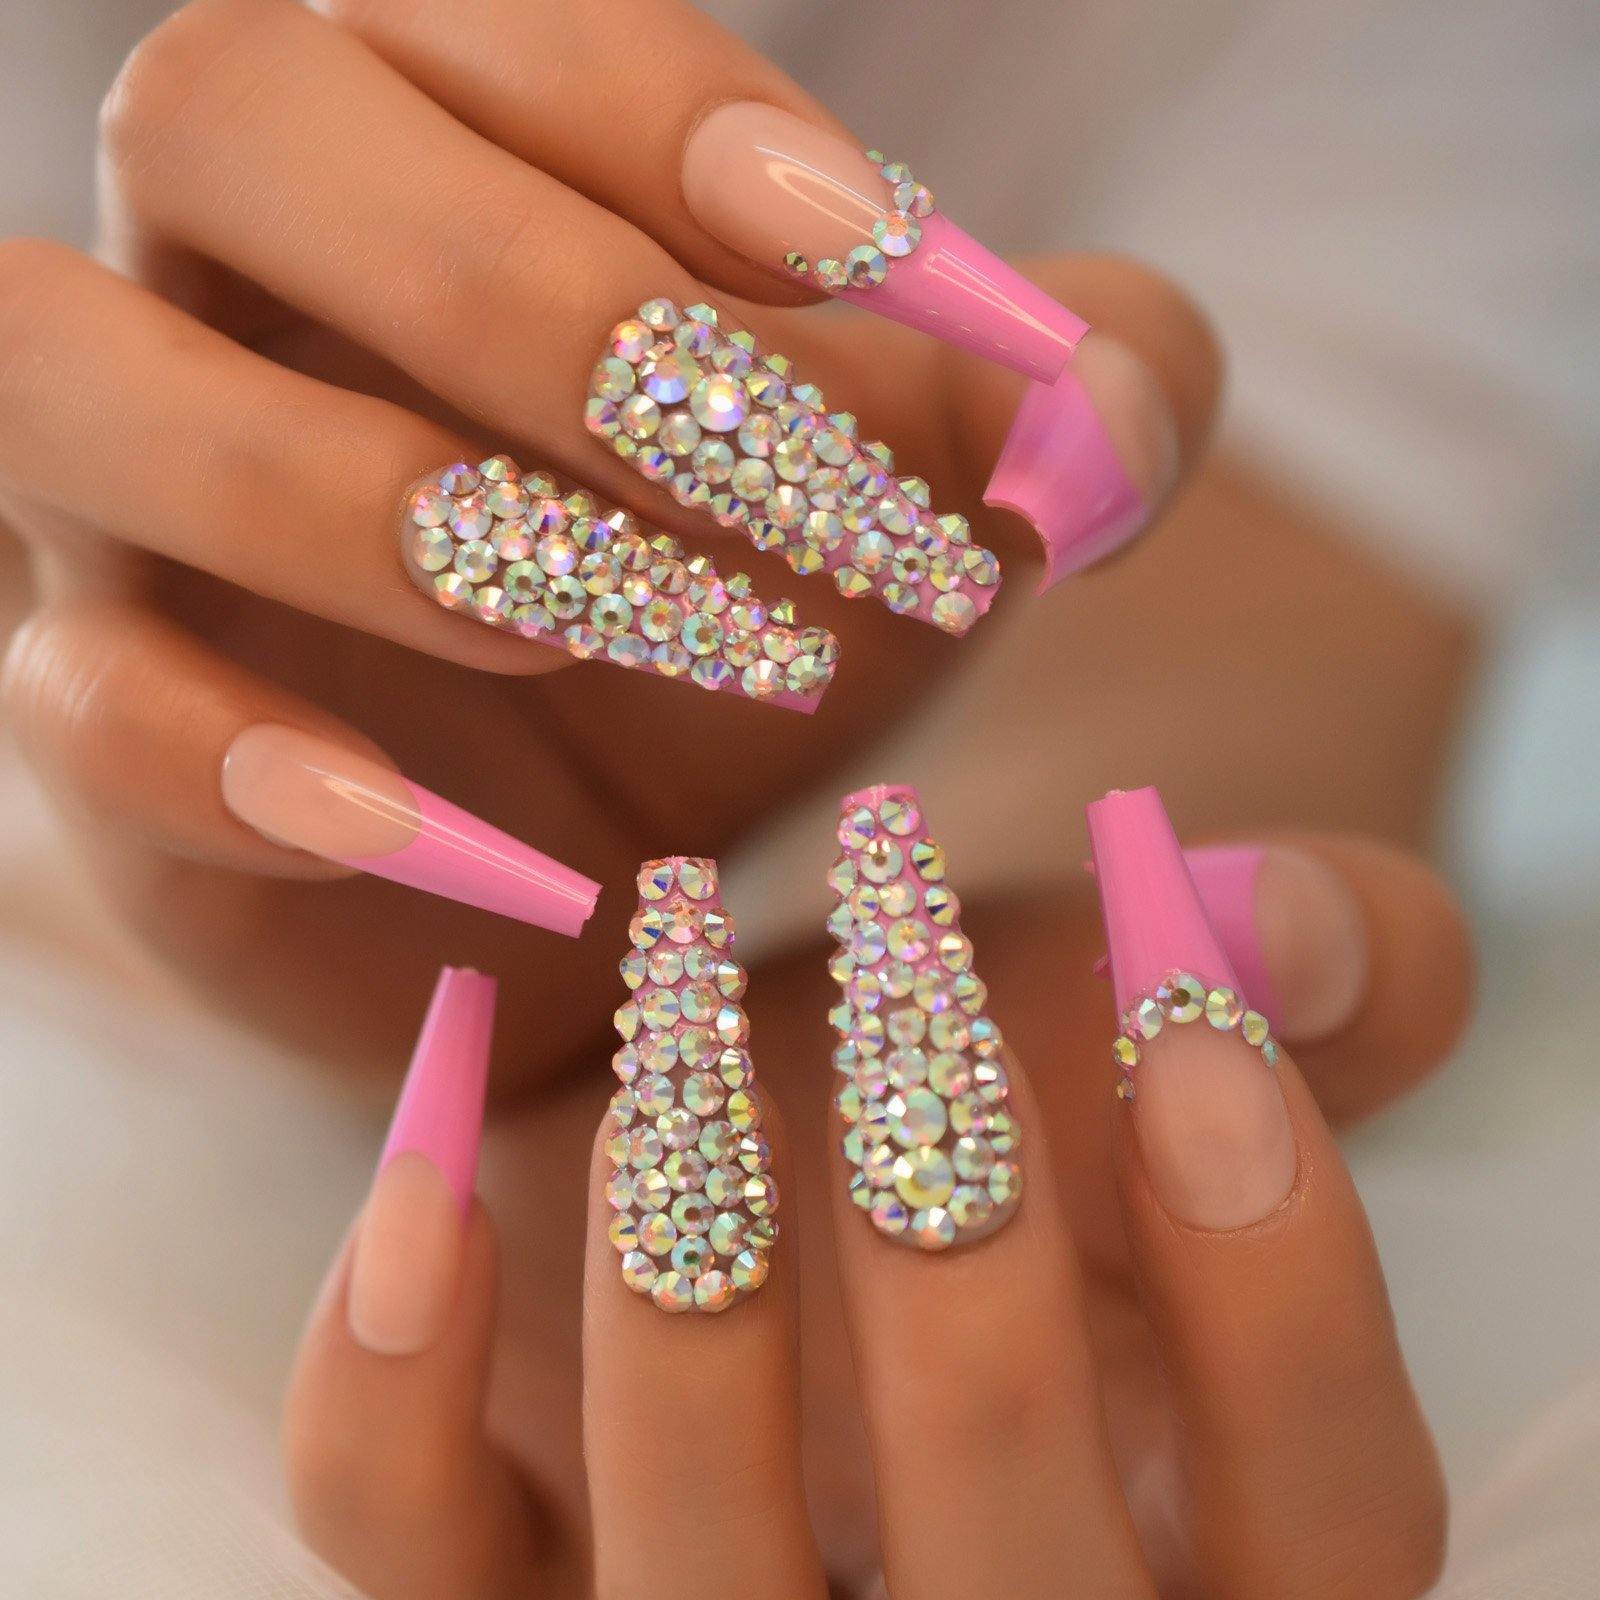 7 enchanting Pink nails with diamonds you must try - Sunkissed Nails